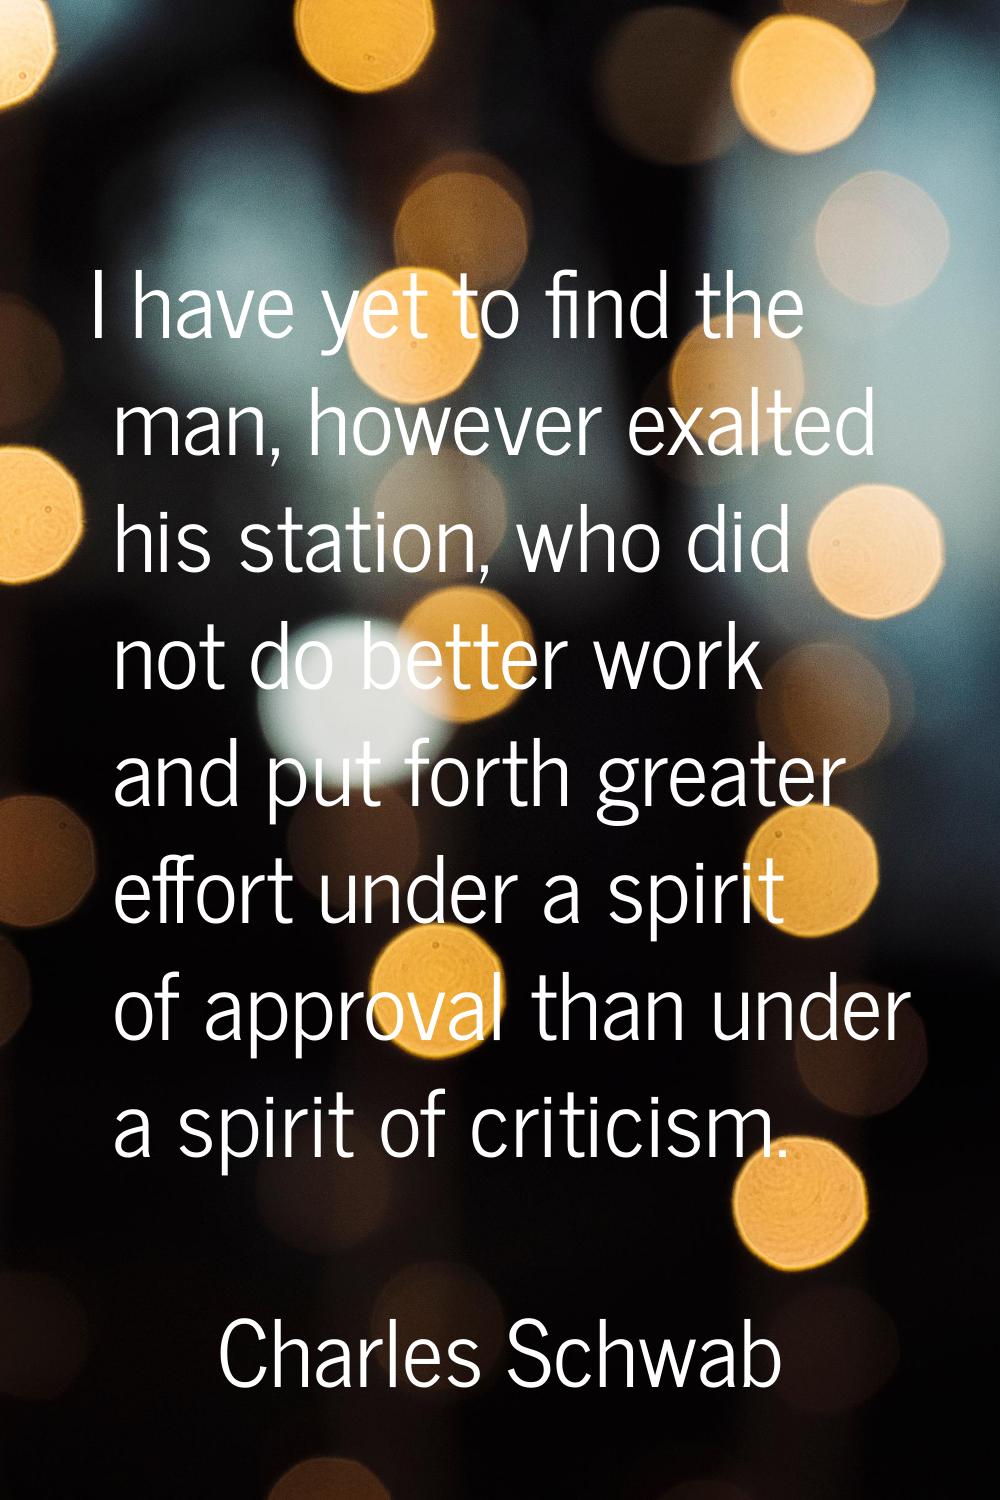 I have yet to find the man, however exalted his station, who did not do better work and put forth g